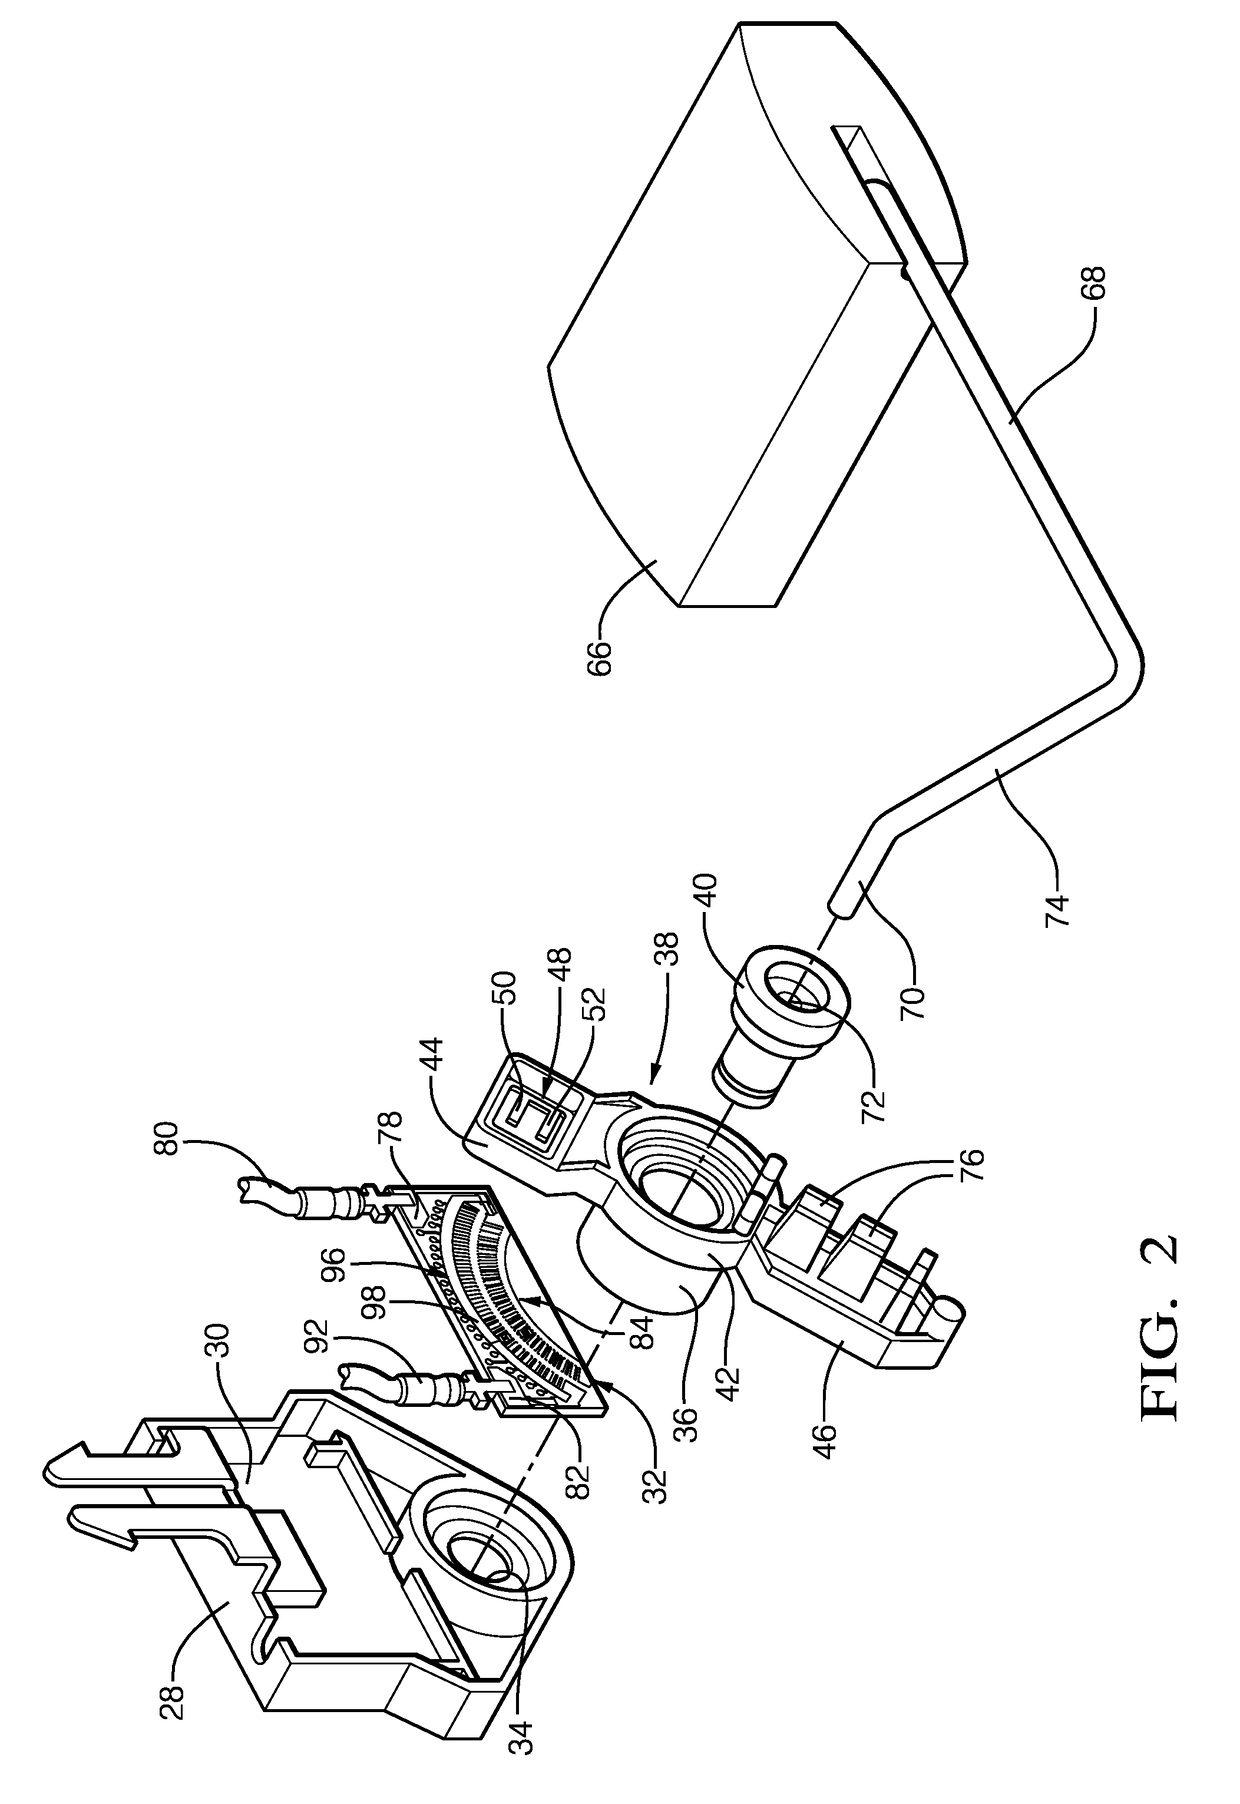 Electrical connection having a gold contact surface with discrete areas of hardness and fuel level sensor using the same